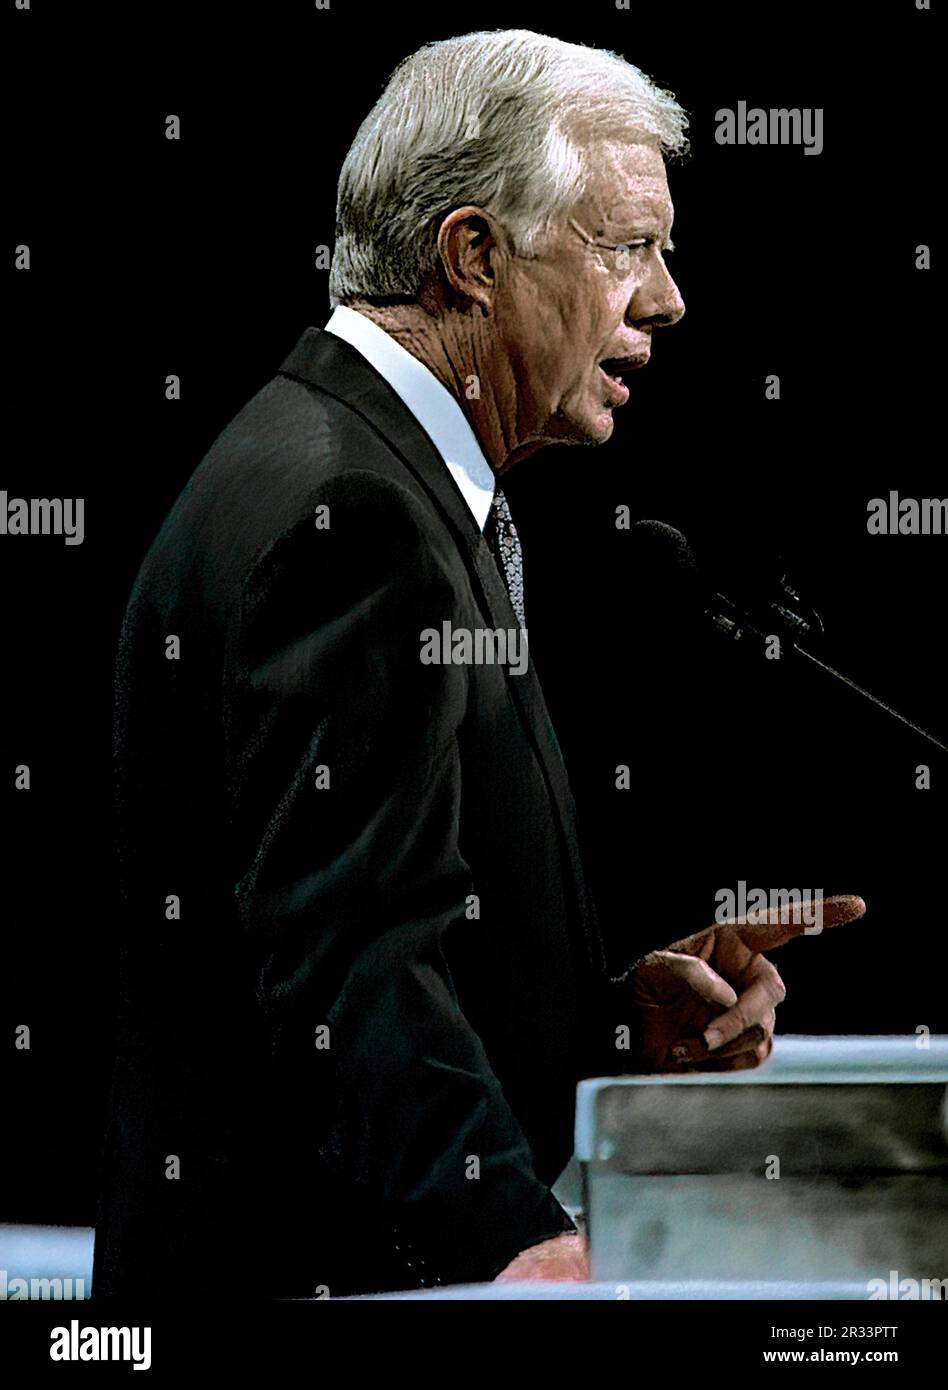 NEW YORK, NEW YORK - JULY 14, 1992  Former United States President James Carter addresses the 1992 Democratic Nominating Convention from the center stage at Madison Square Garden. Stock Photo